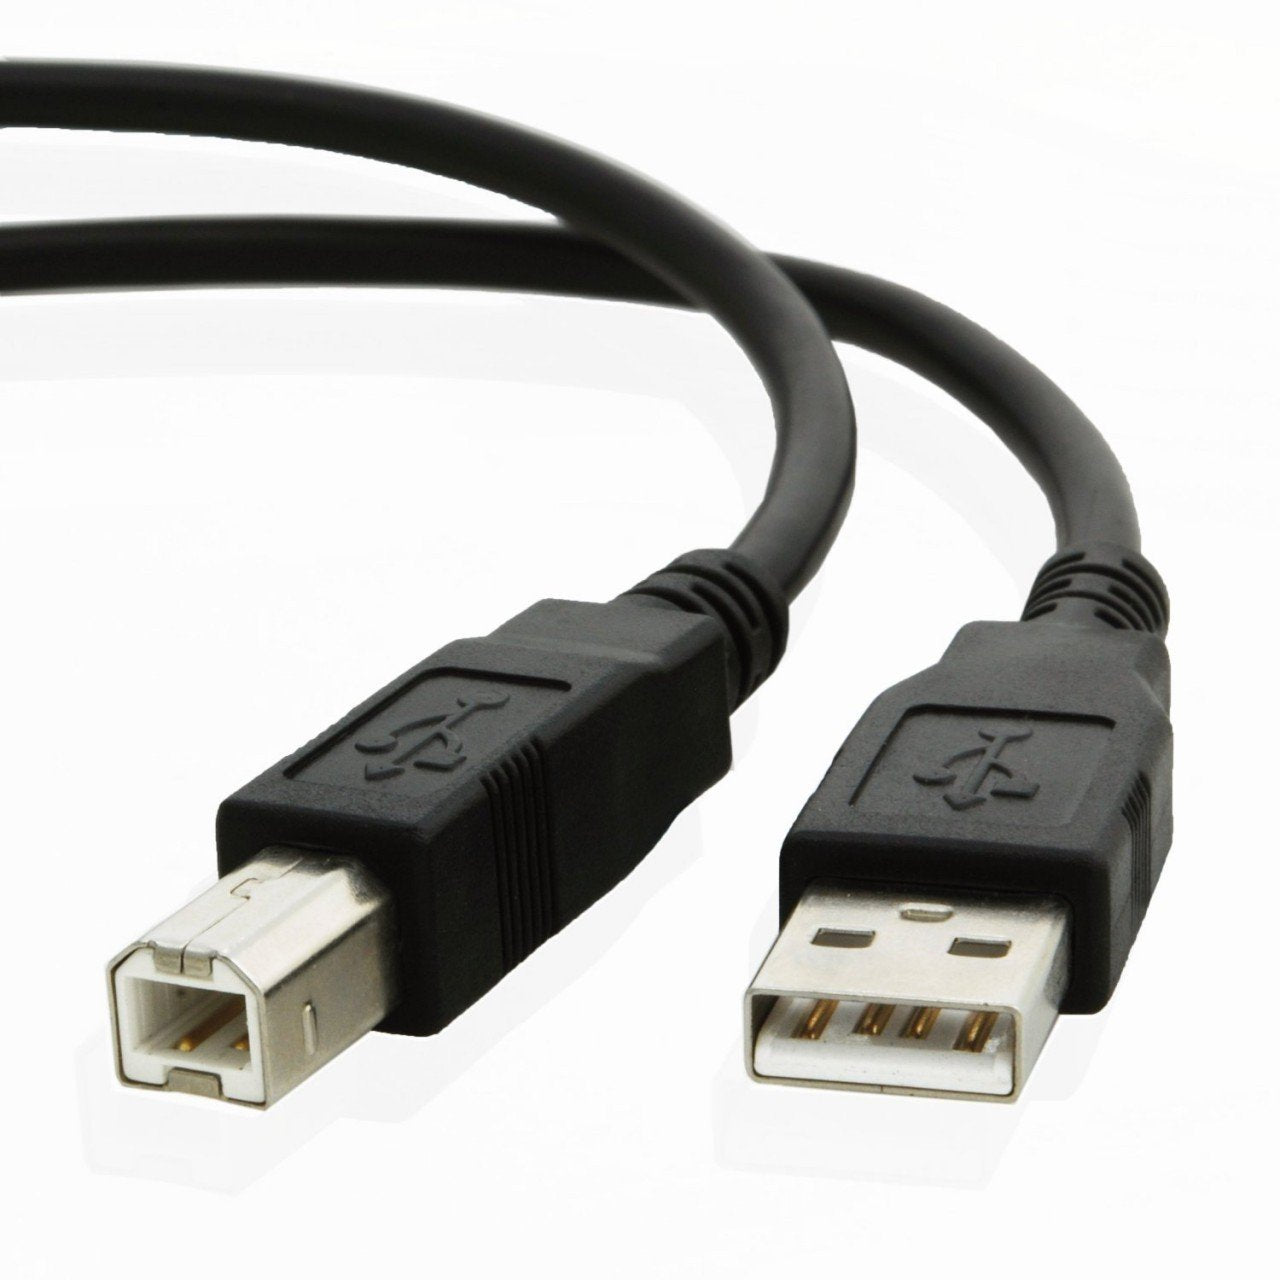 USB cable for Fujitsu SP SP-425